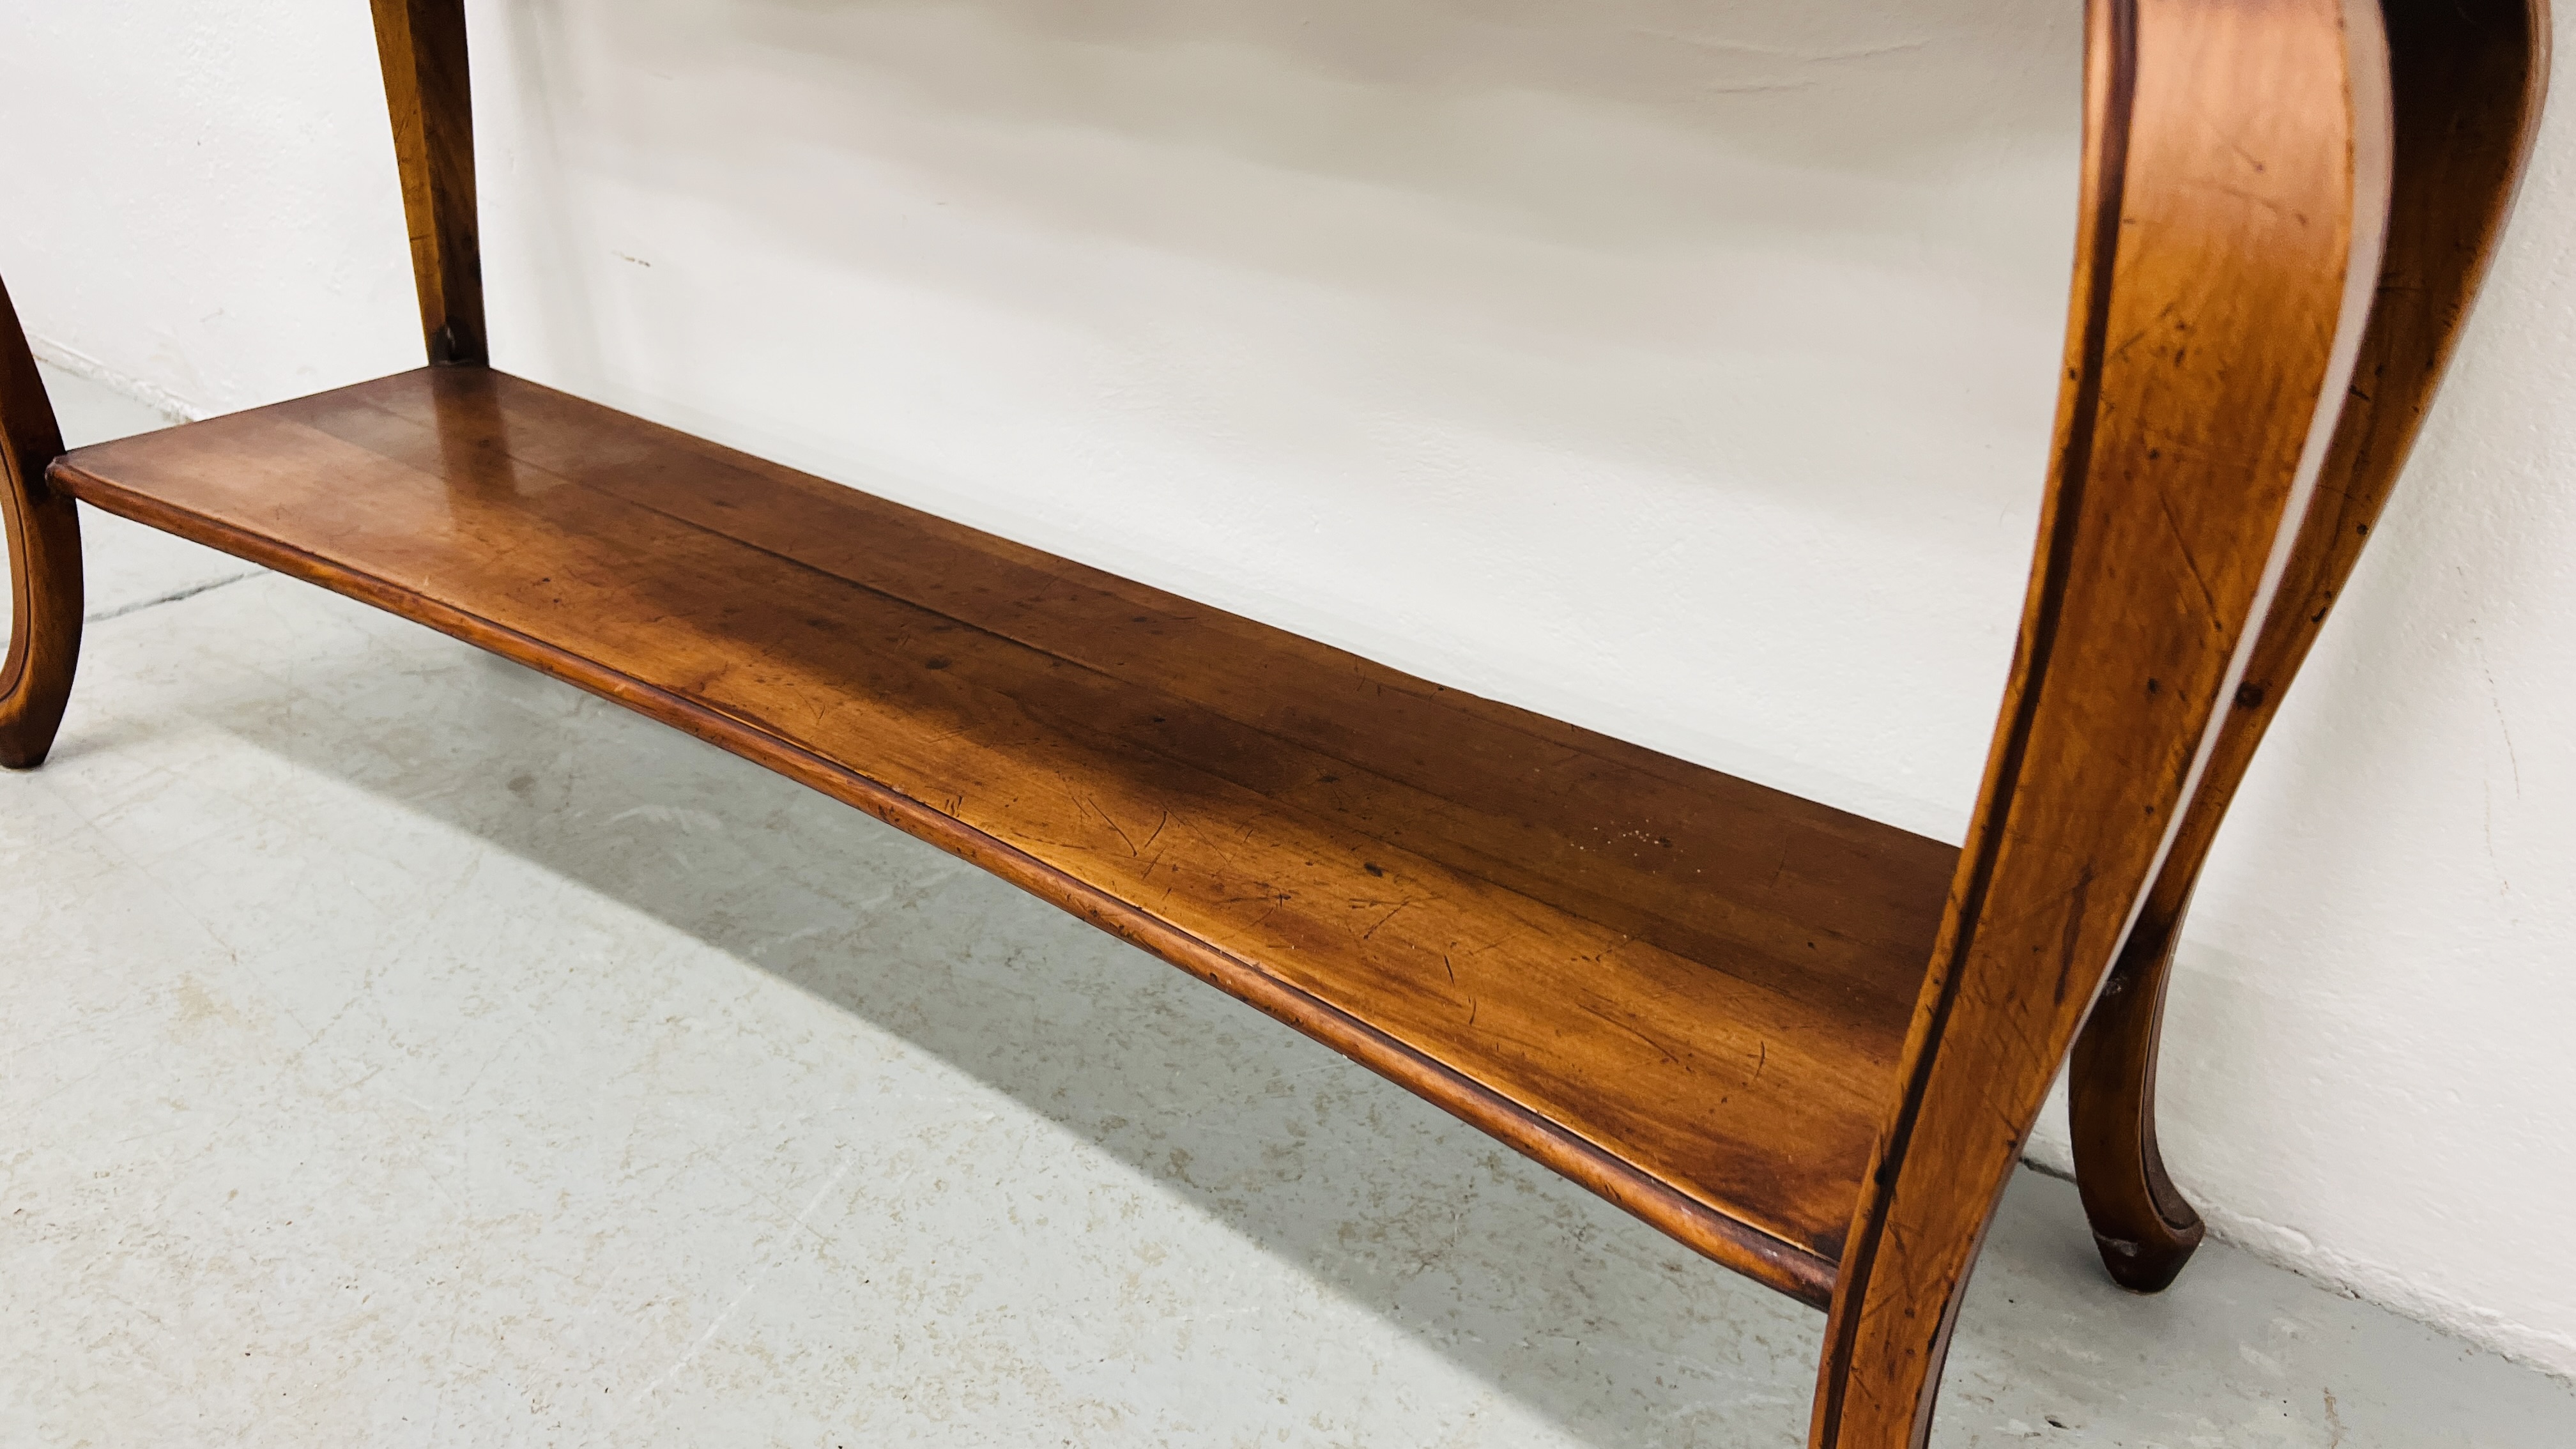 REPRODUCTION MAHOGANY SIDE TABLE WITH CENTRAL CONCEALED DRAWER AND SHELF BELOW WIDTH 118CM. - Image 6 of 9